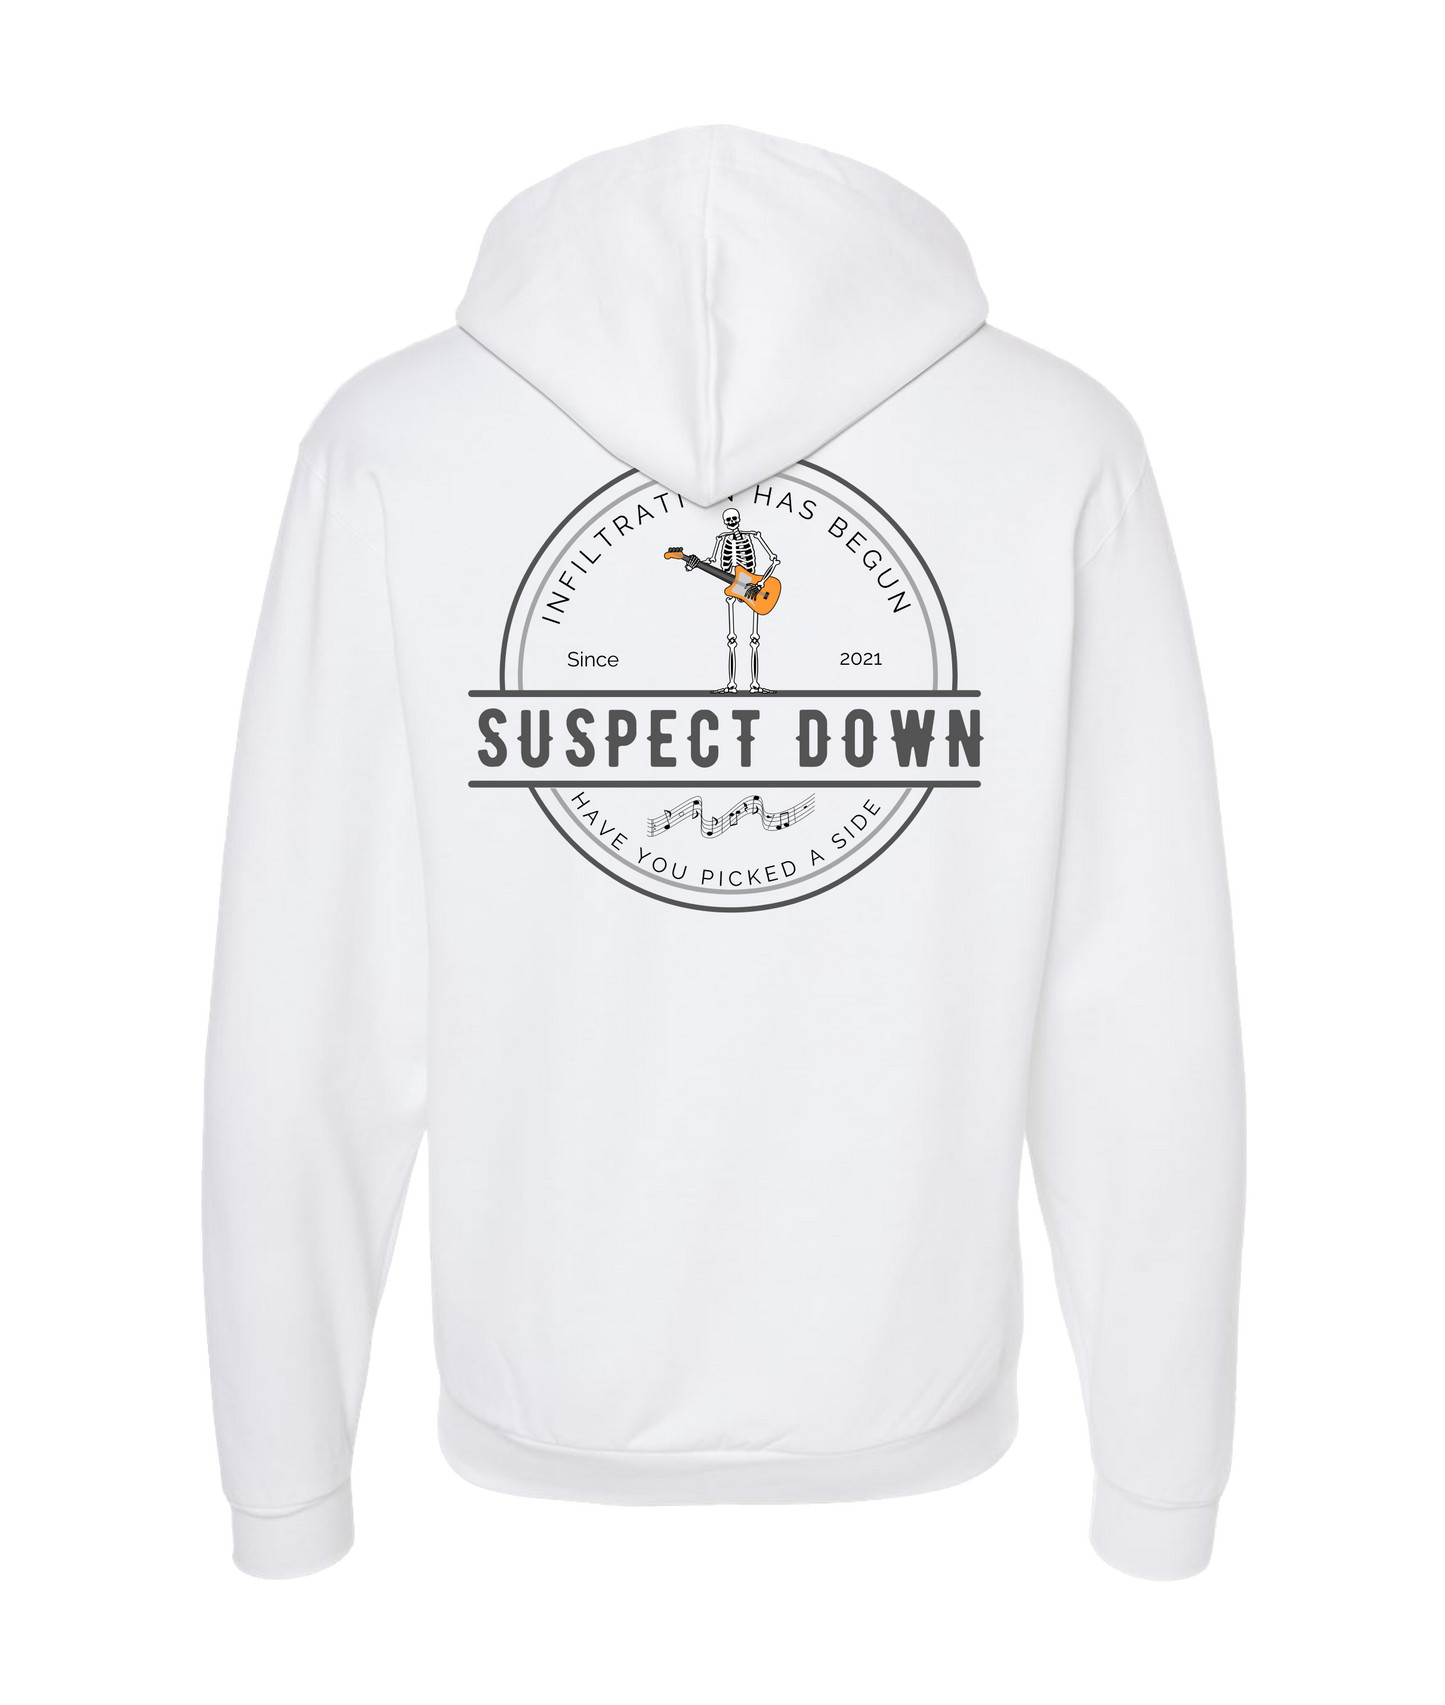 Suspect Down - INFILTRATION - White Zip Up Hoodie